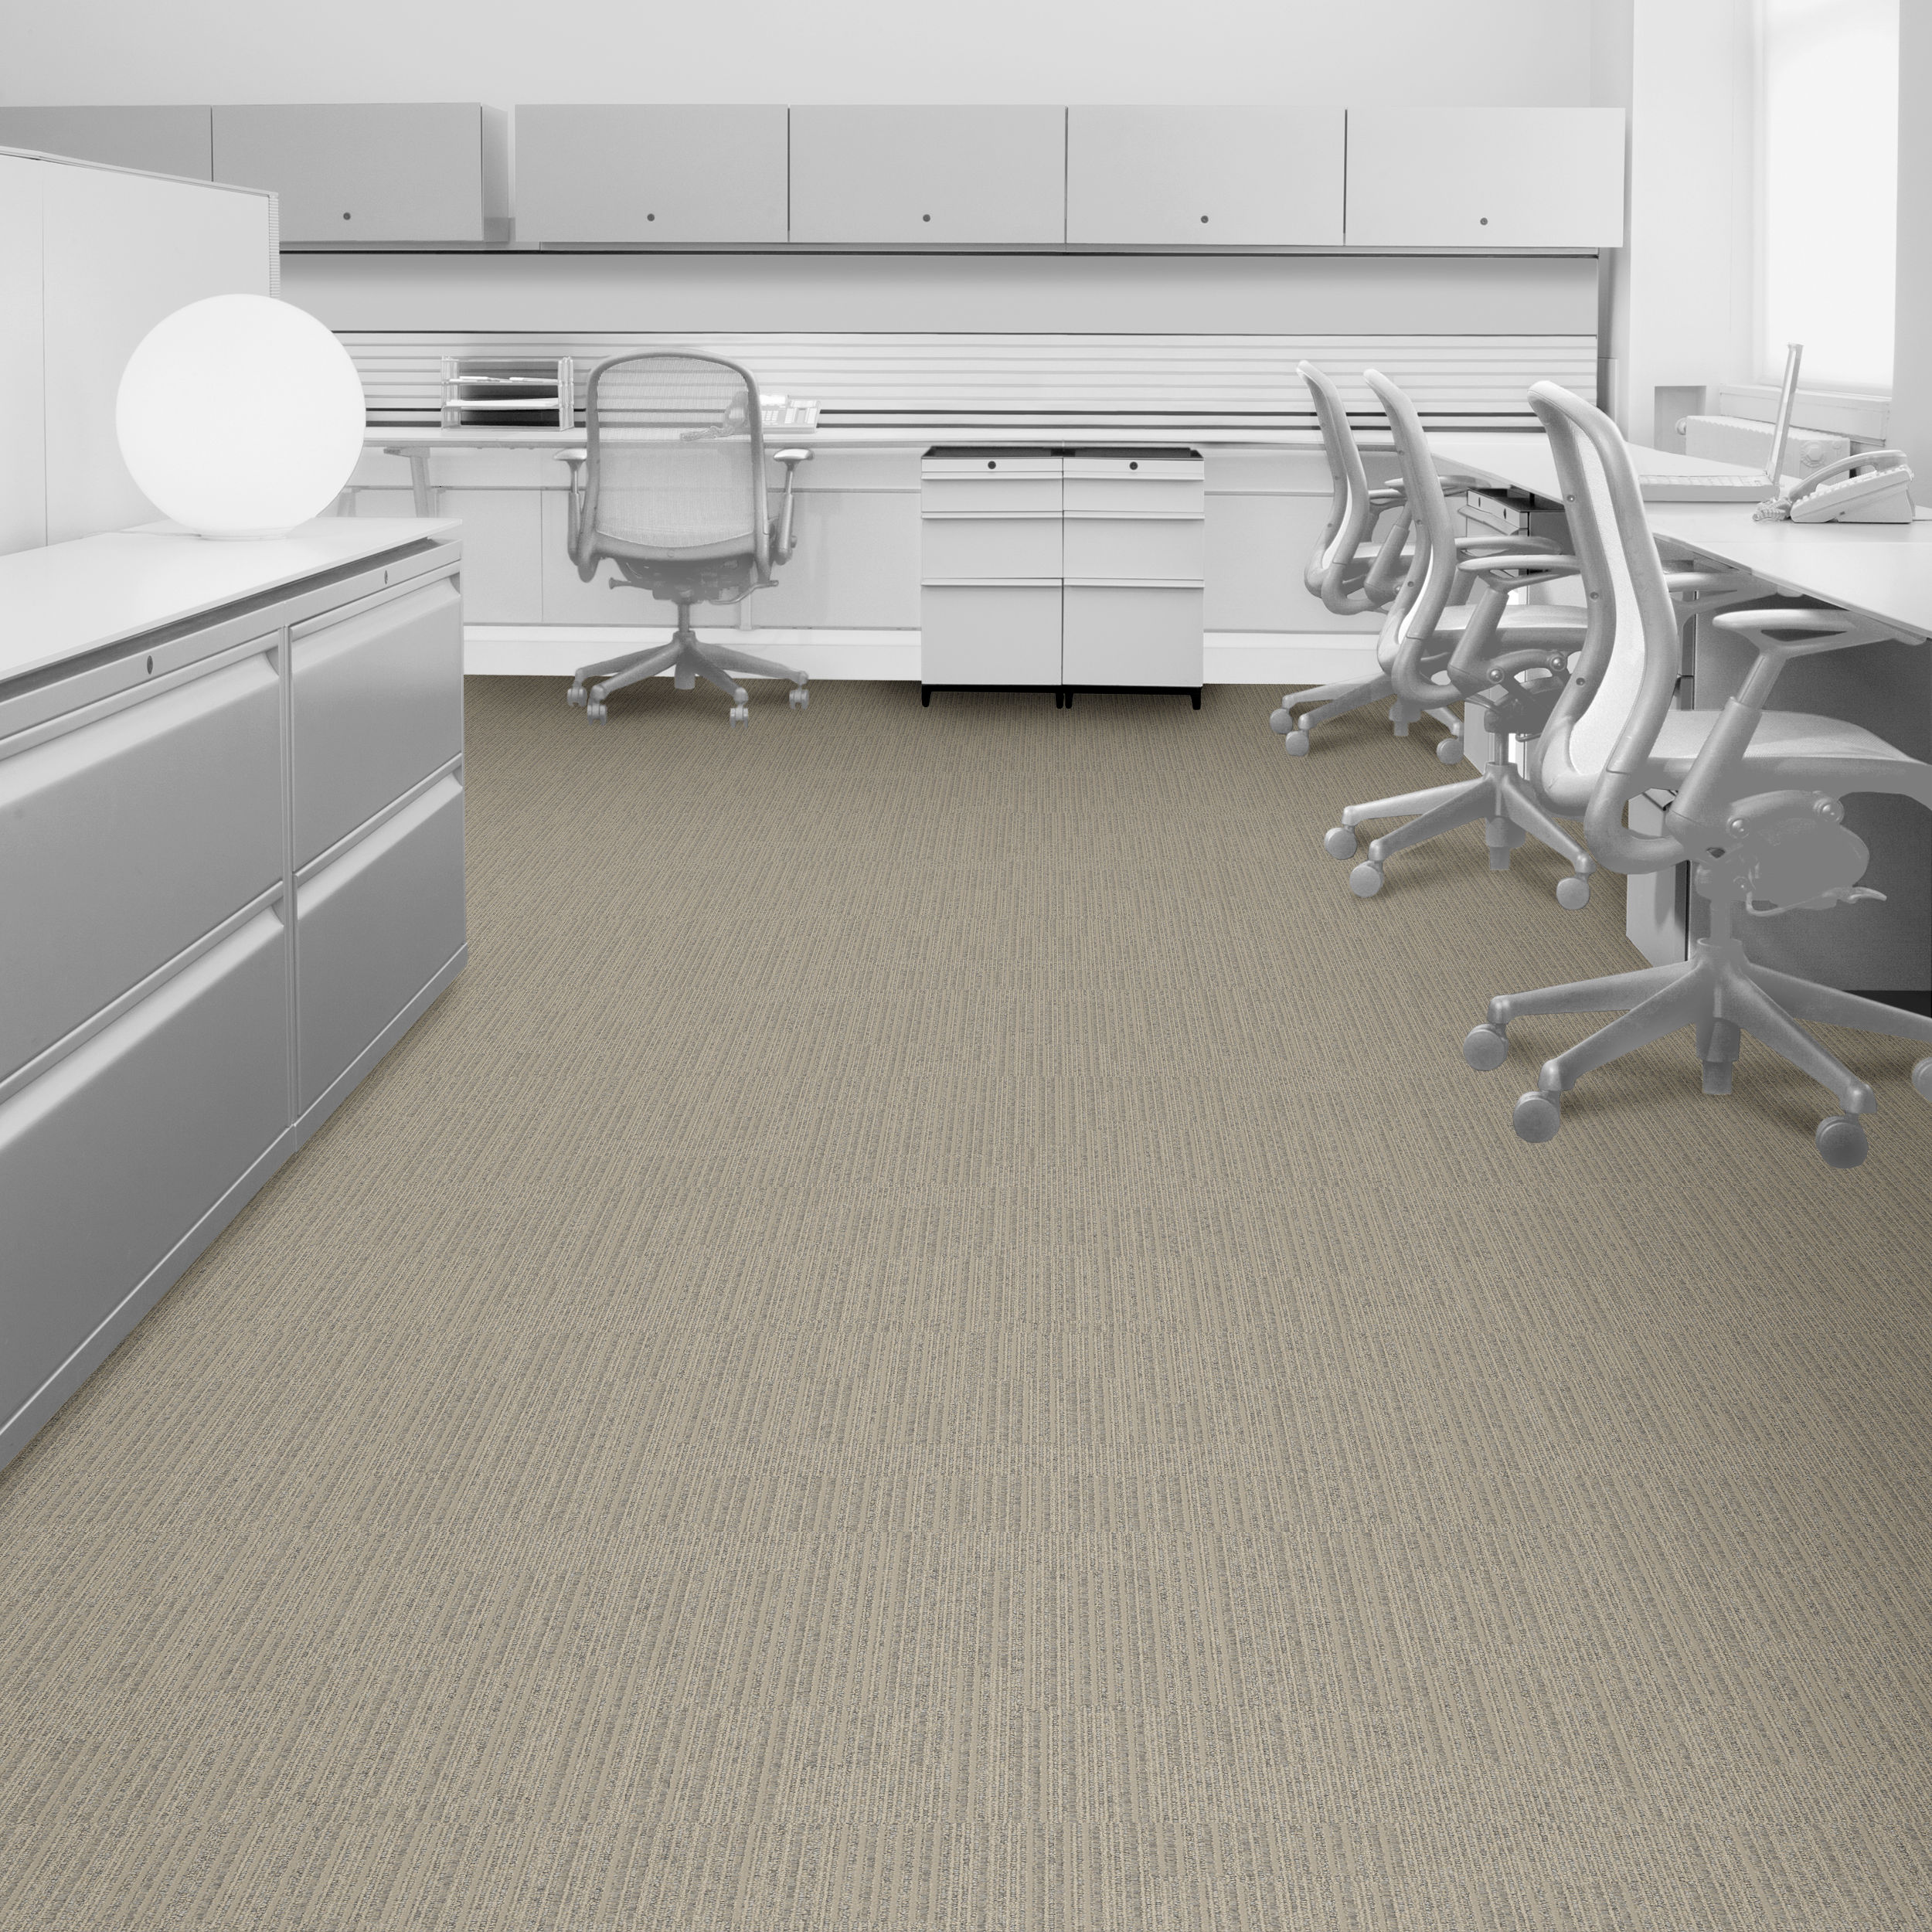 Interface Equilibrium Equation Carpet Tile in office setting.